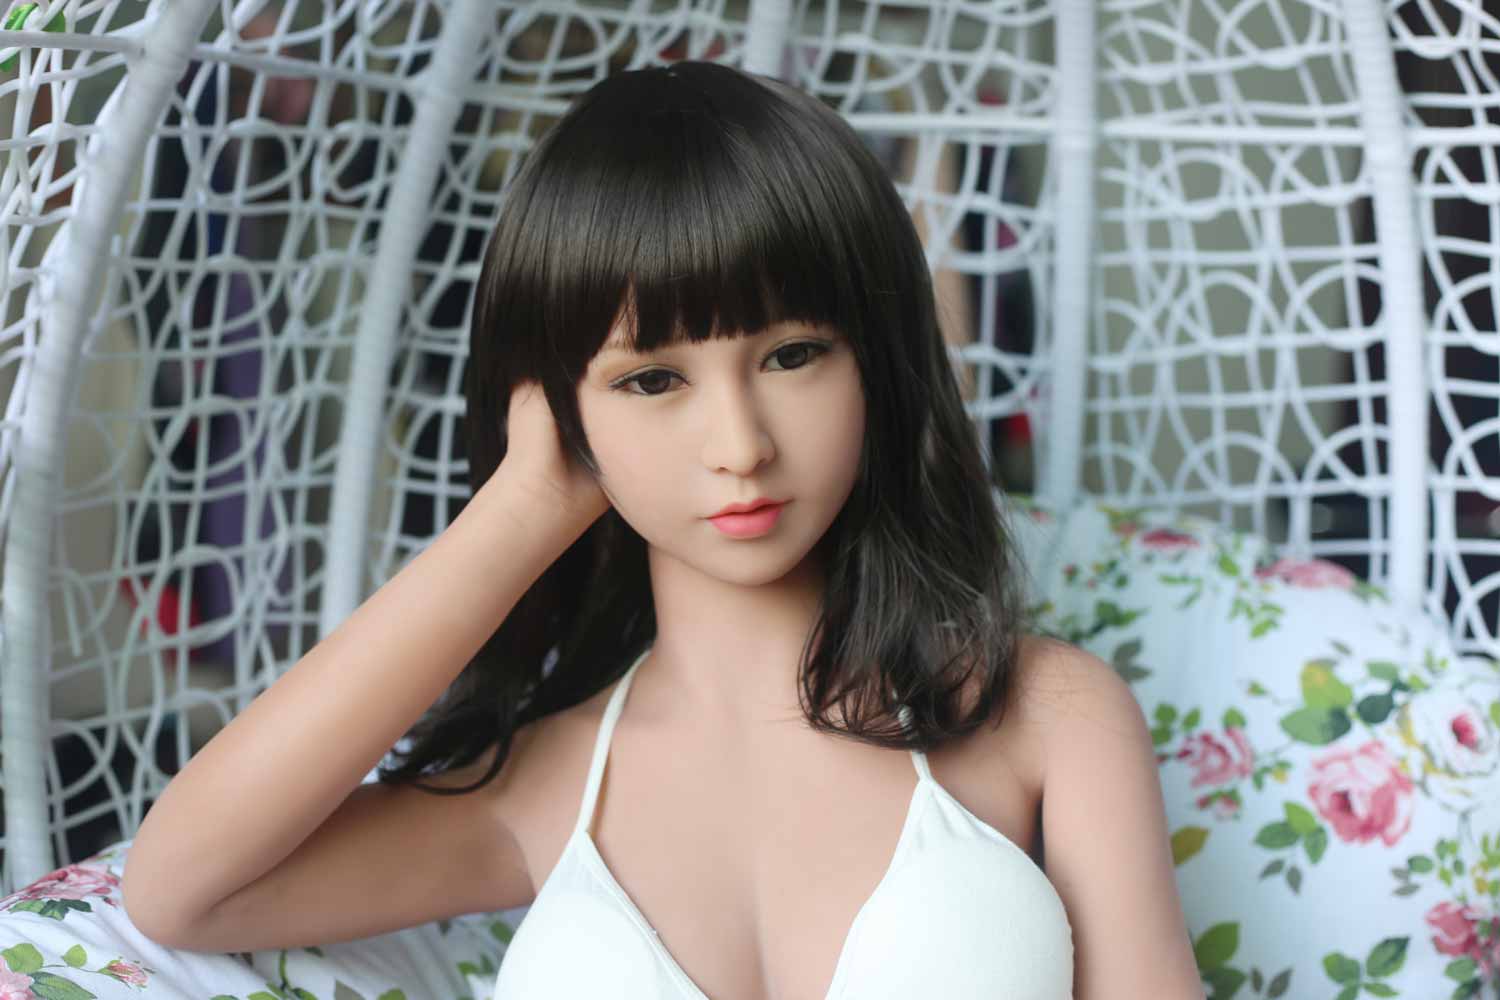 Sex doll with hands on head